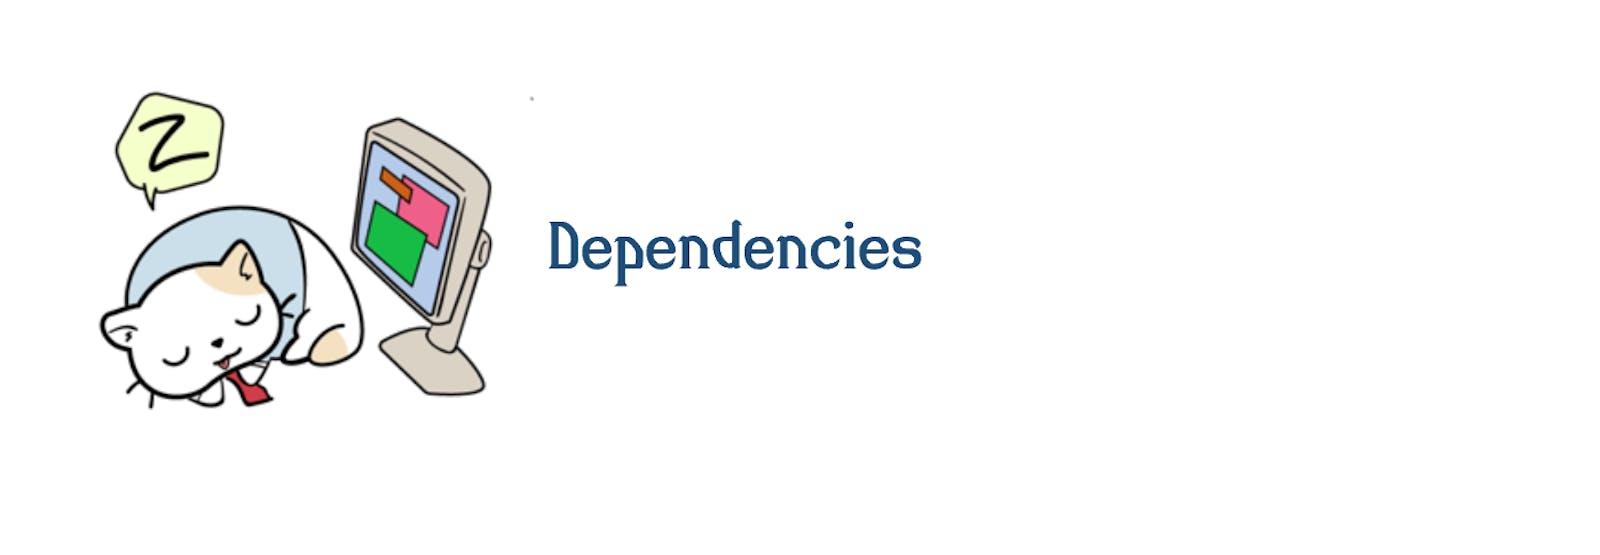 Tale of Dependencies (Vendor lock-in, vendor neutrality and Managed Services)